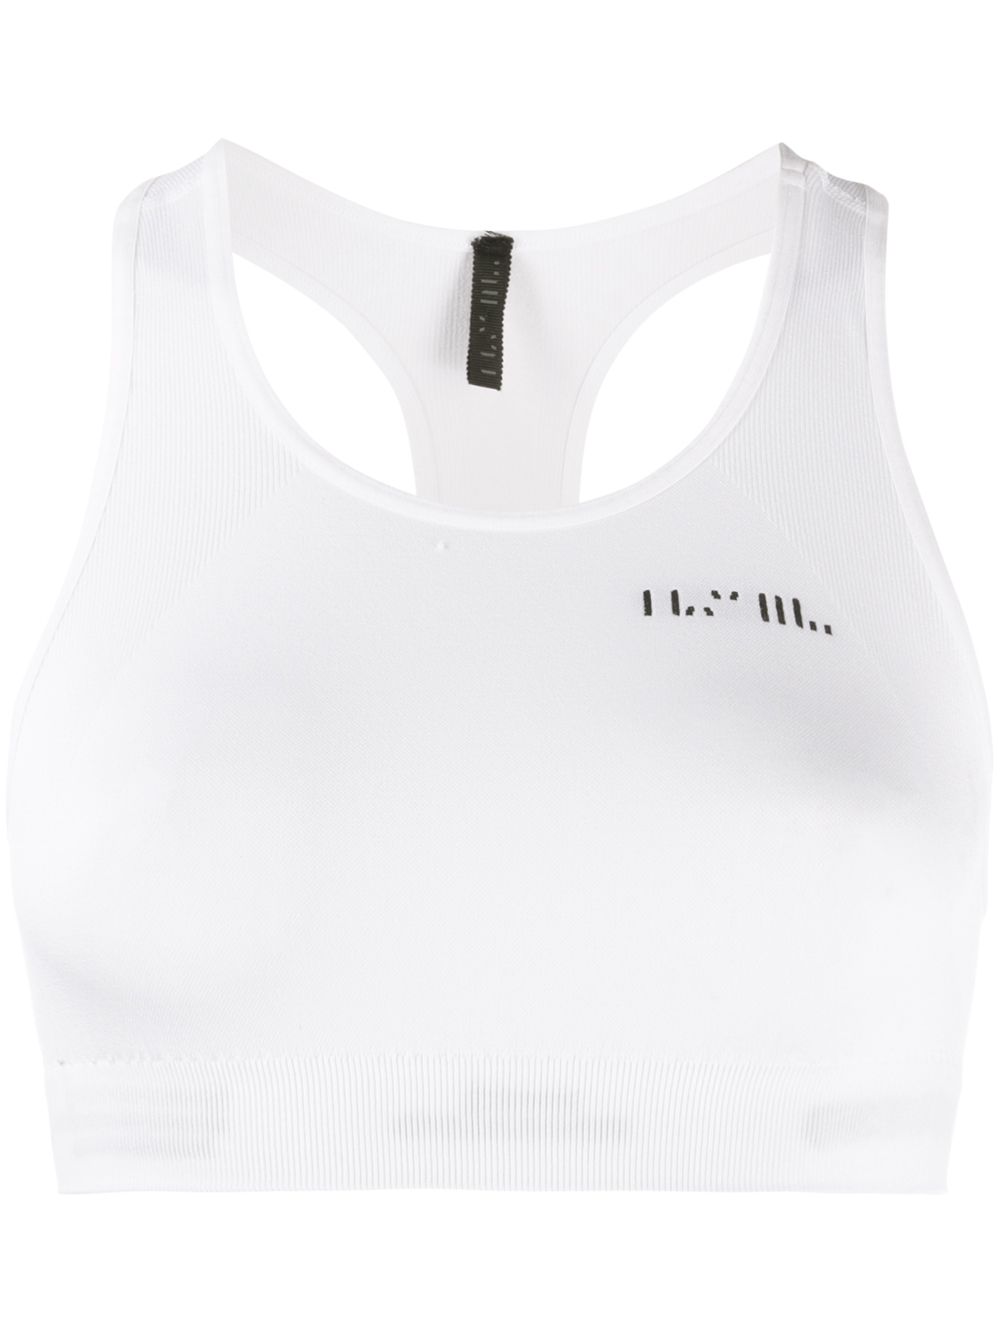 BEN TAVERNITI UNRAVEL PROJECT UNRAVEL PROJECT PRINTED CROPPED TOP - WHITE